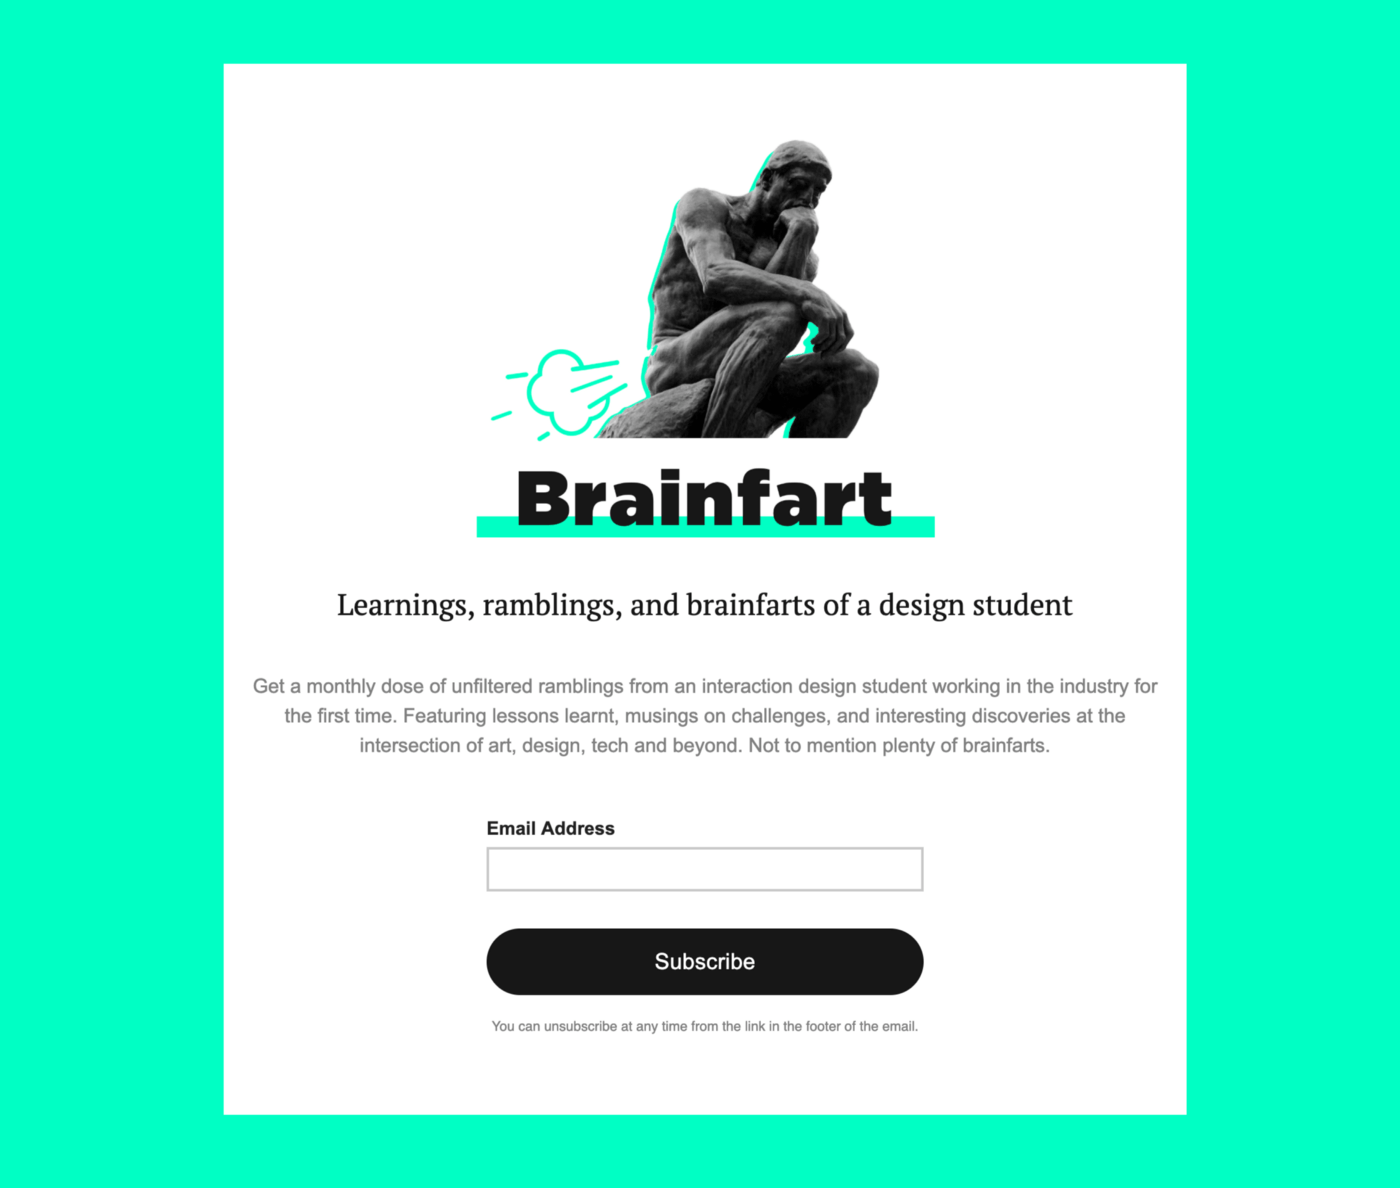 The sign up page for the Brainfart newsletter, which highlights the learnings, ramblings, and brainfarts of a design student.